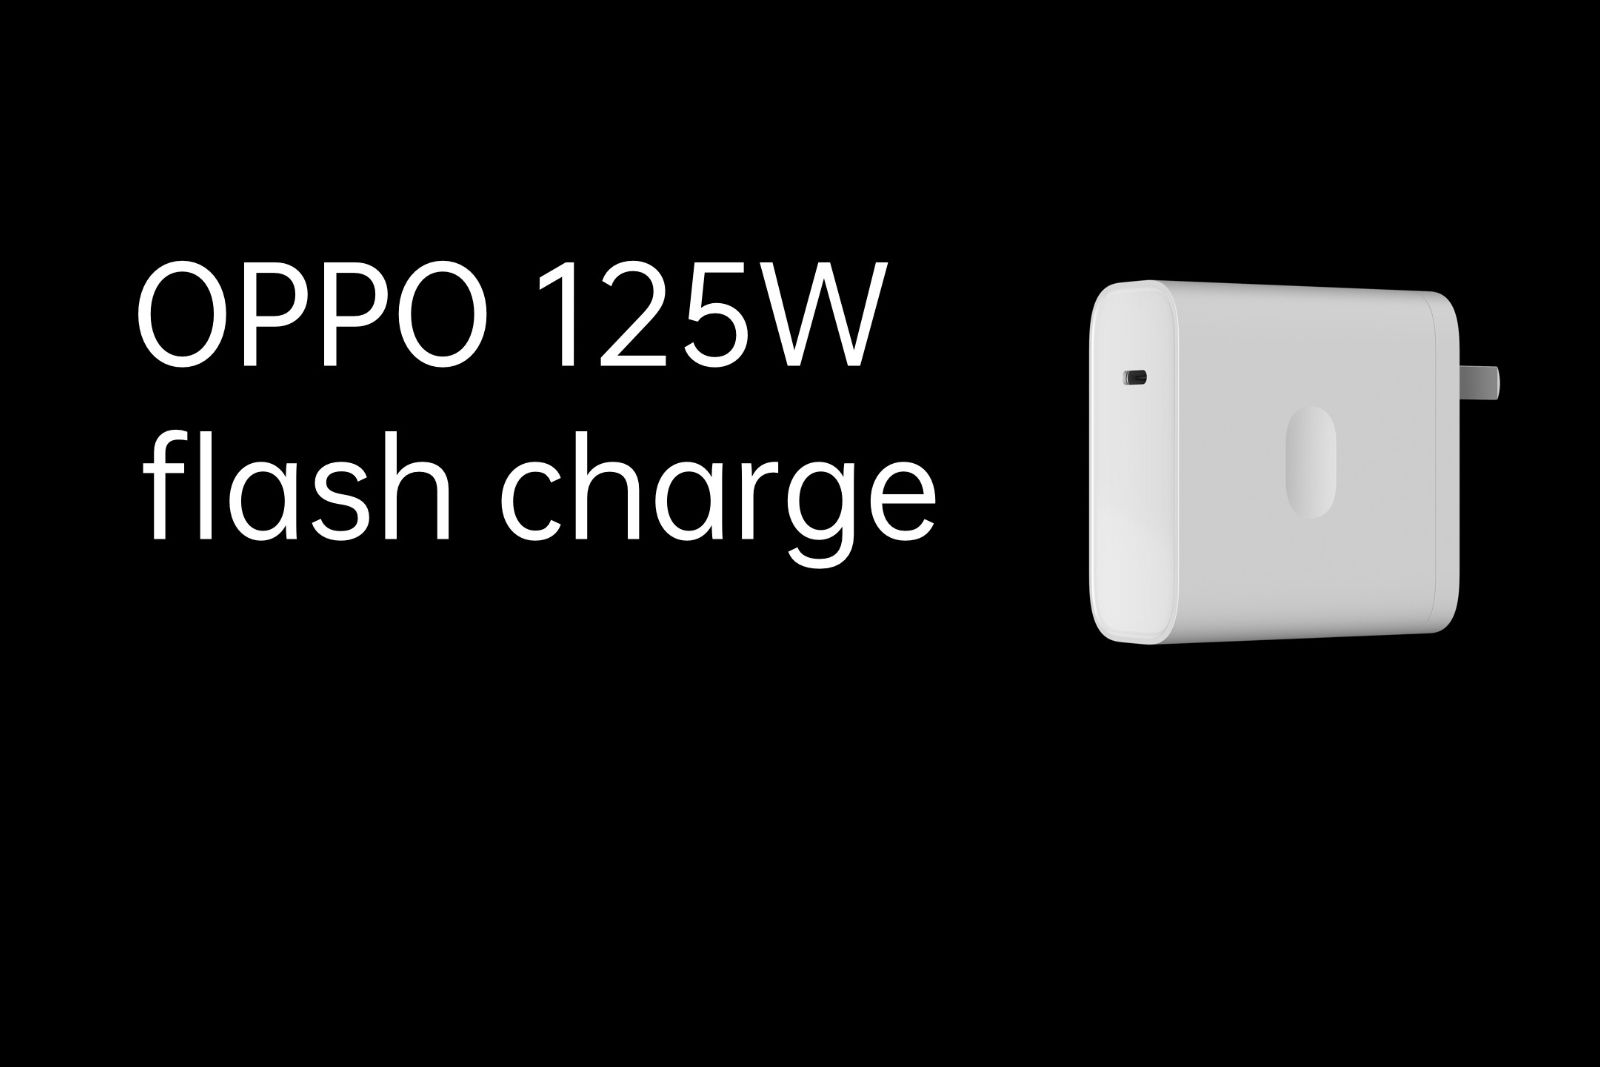 Oppo's latest 125W flash charging tech charges phones at blistering speeds photo 1